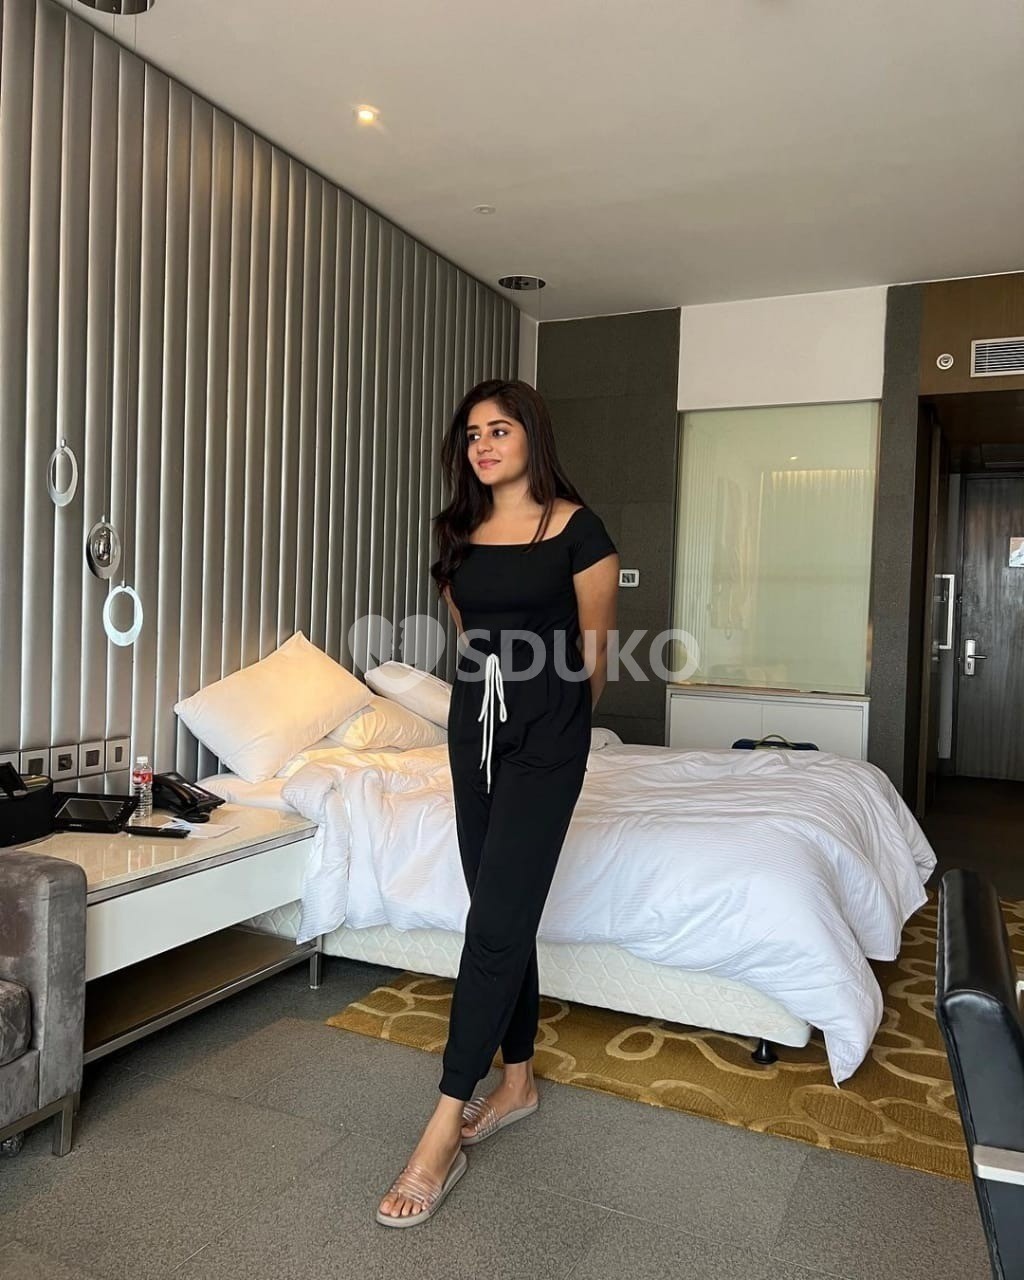 Ghaziabad .shot 1500 night 5000 .. 💯 Safe.🥰AFFORDABLE AND CHEAPEST CALL GIRL SERVICE